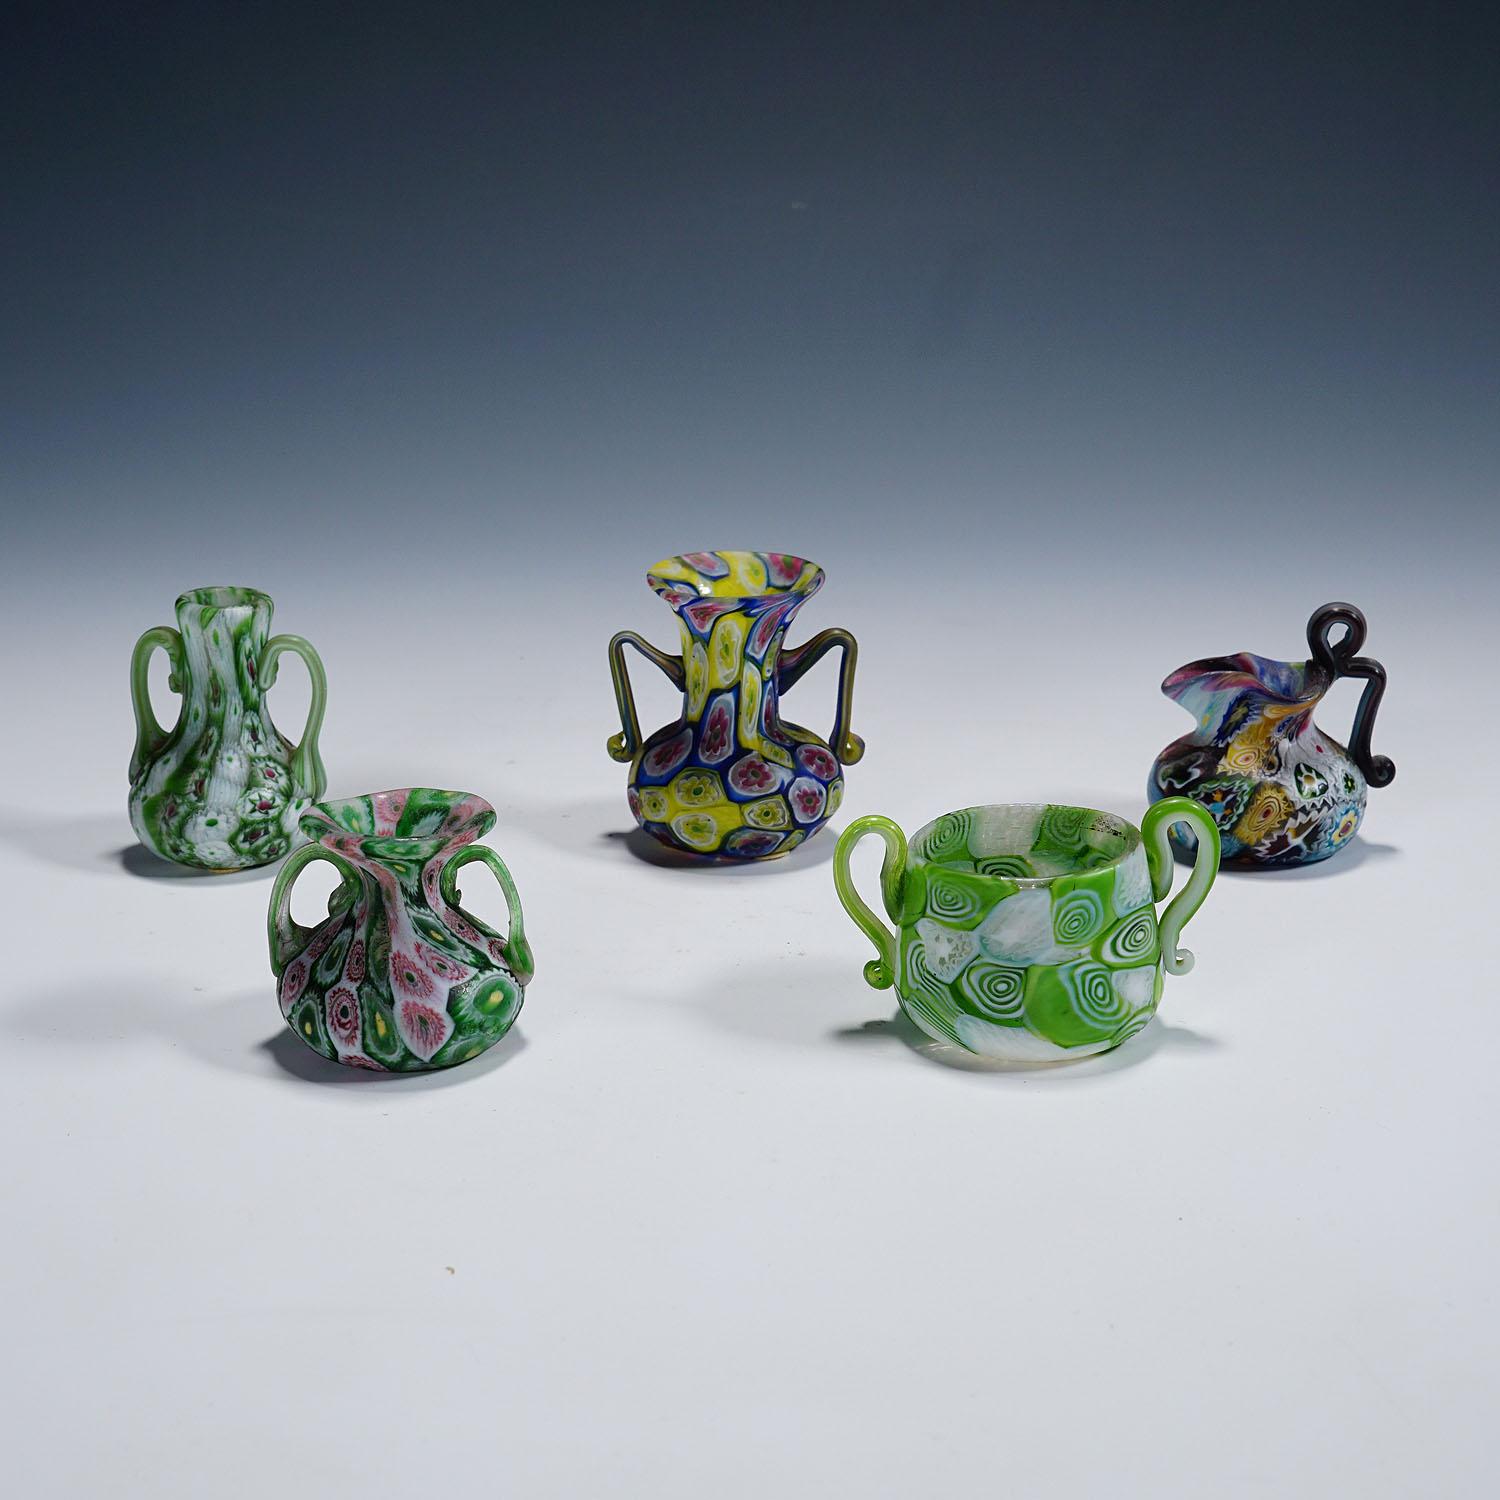 Set of Fife Antique Millefiori Vases by Fratelli Toso, Murano

A set of five millefiore murrine glass vases, manufactured by Vetreria Fratelli Toso around 1910-20.  All vases feature handles and are executed with polychrome multicoloured murrines.